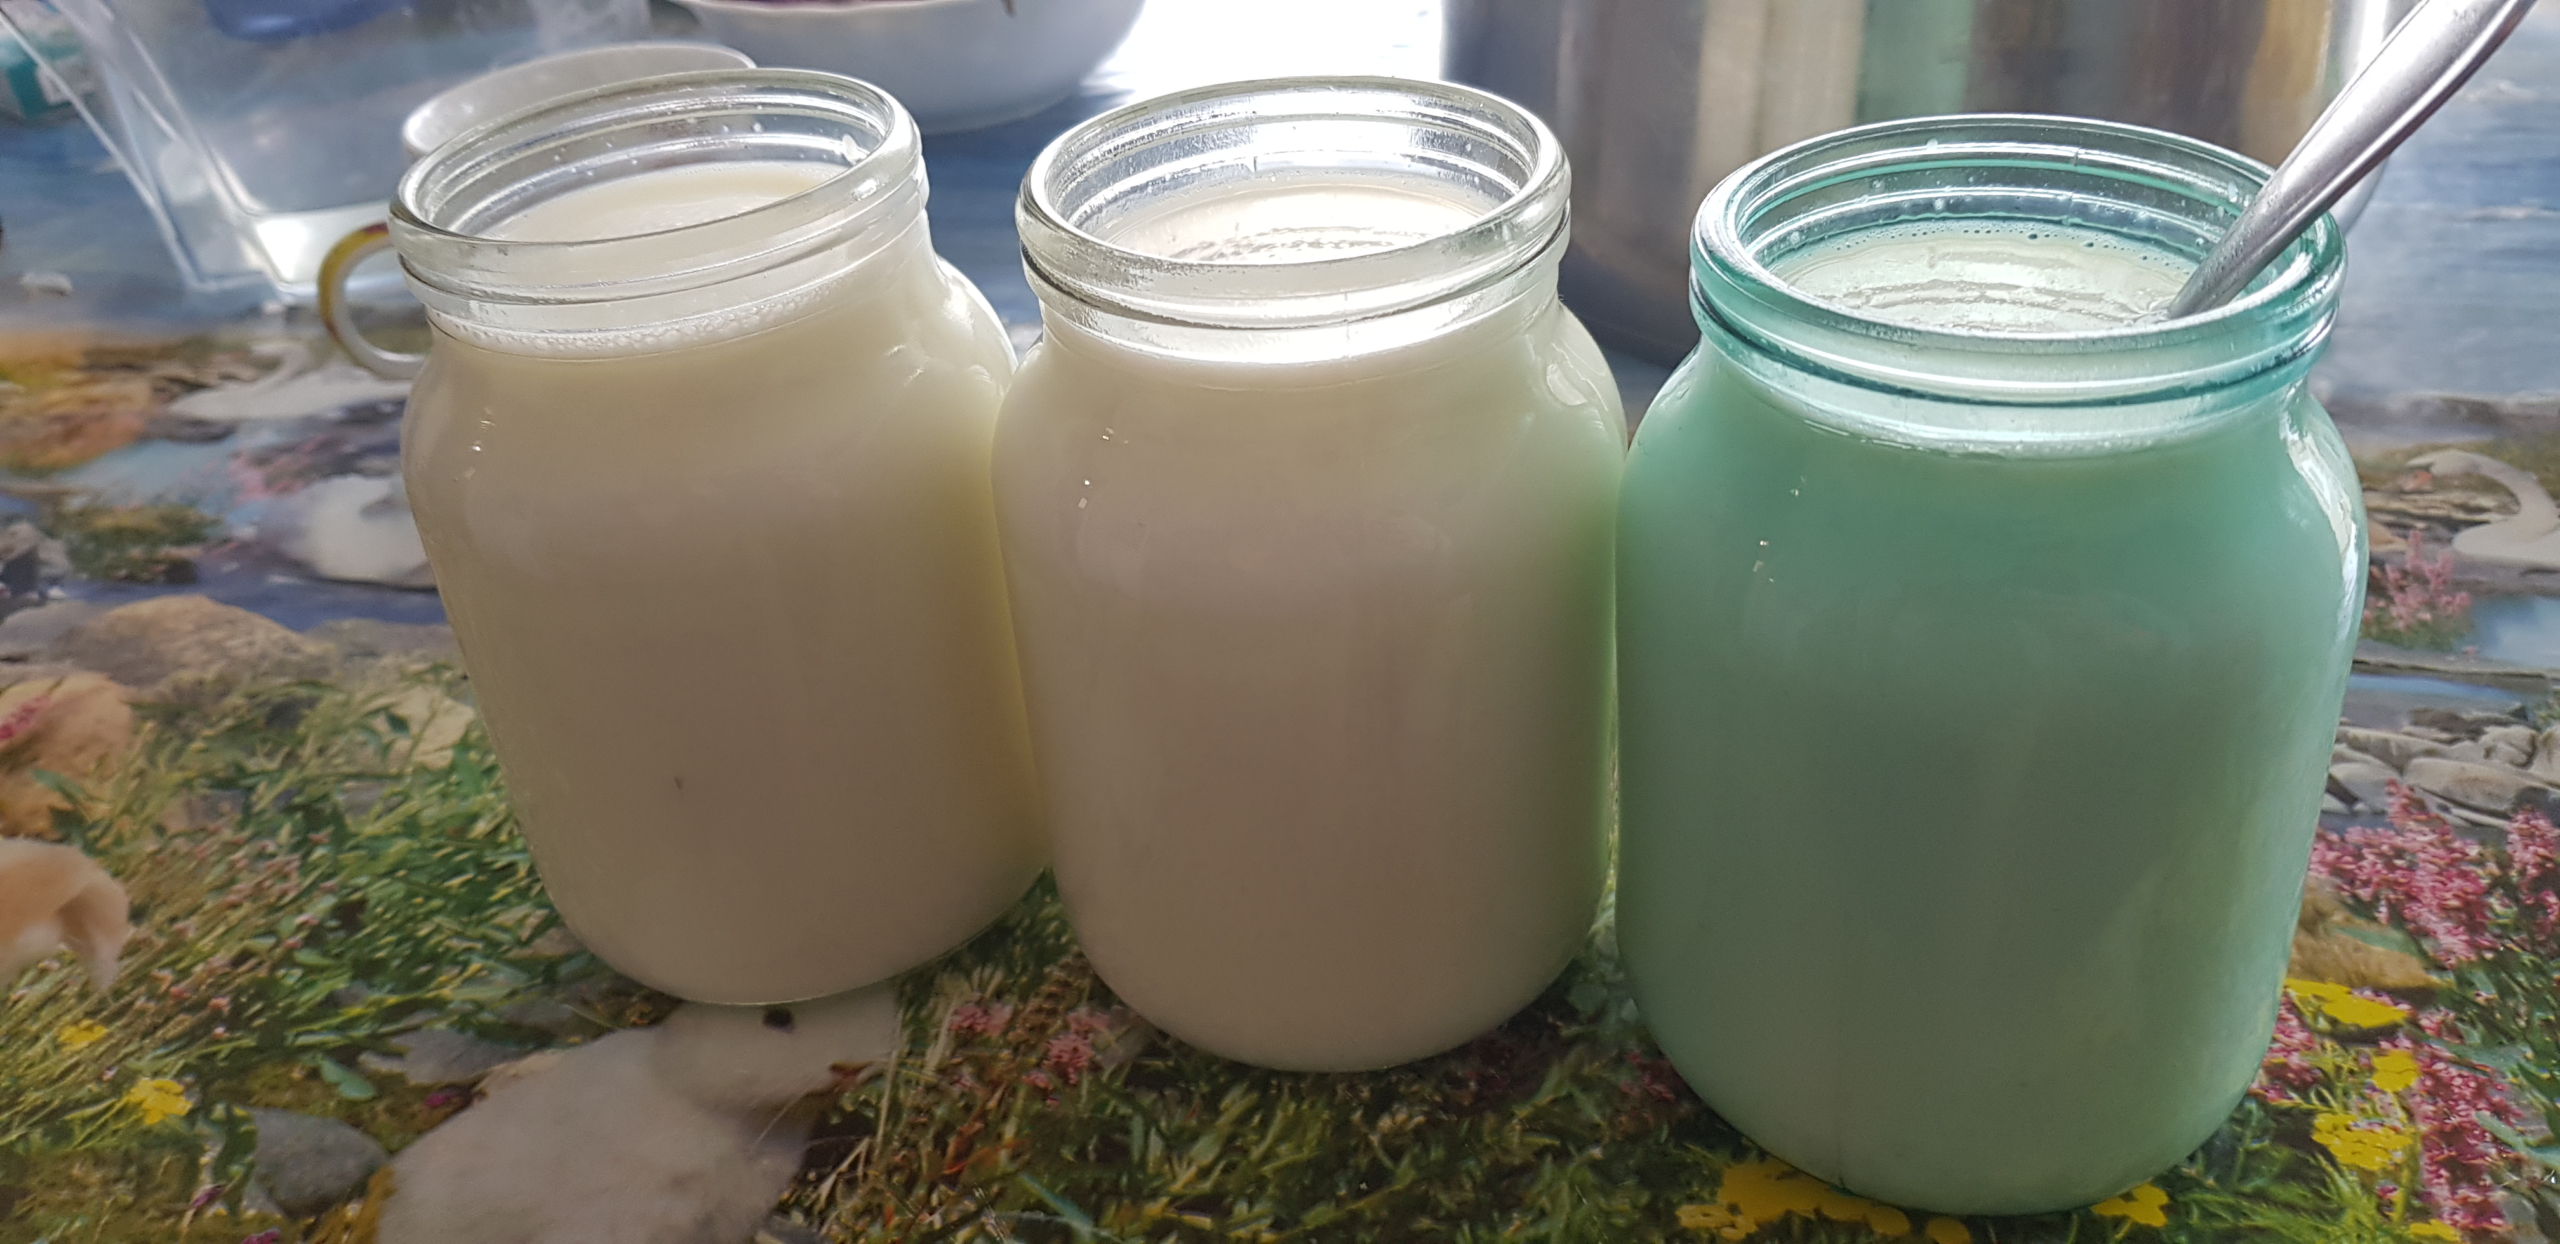 Bulgarian yogurt: An old tradition, alive and well - International Scientific Association for Probiotics and Prebiotics (ISAPP)